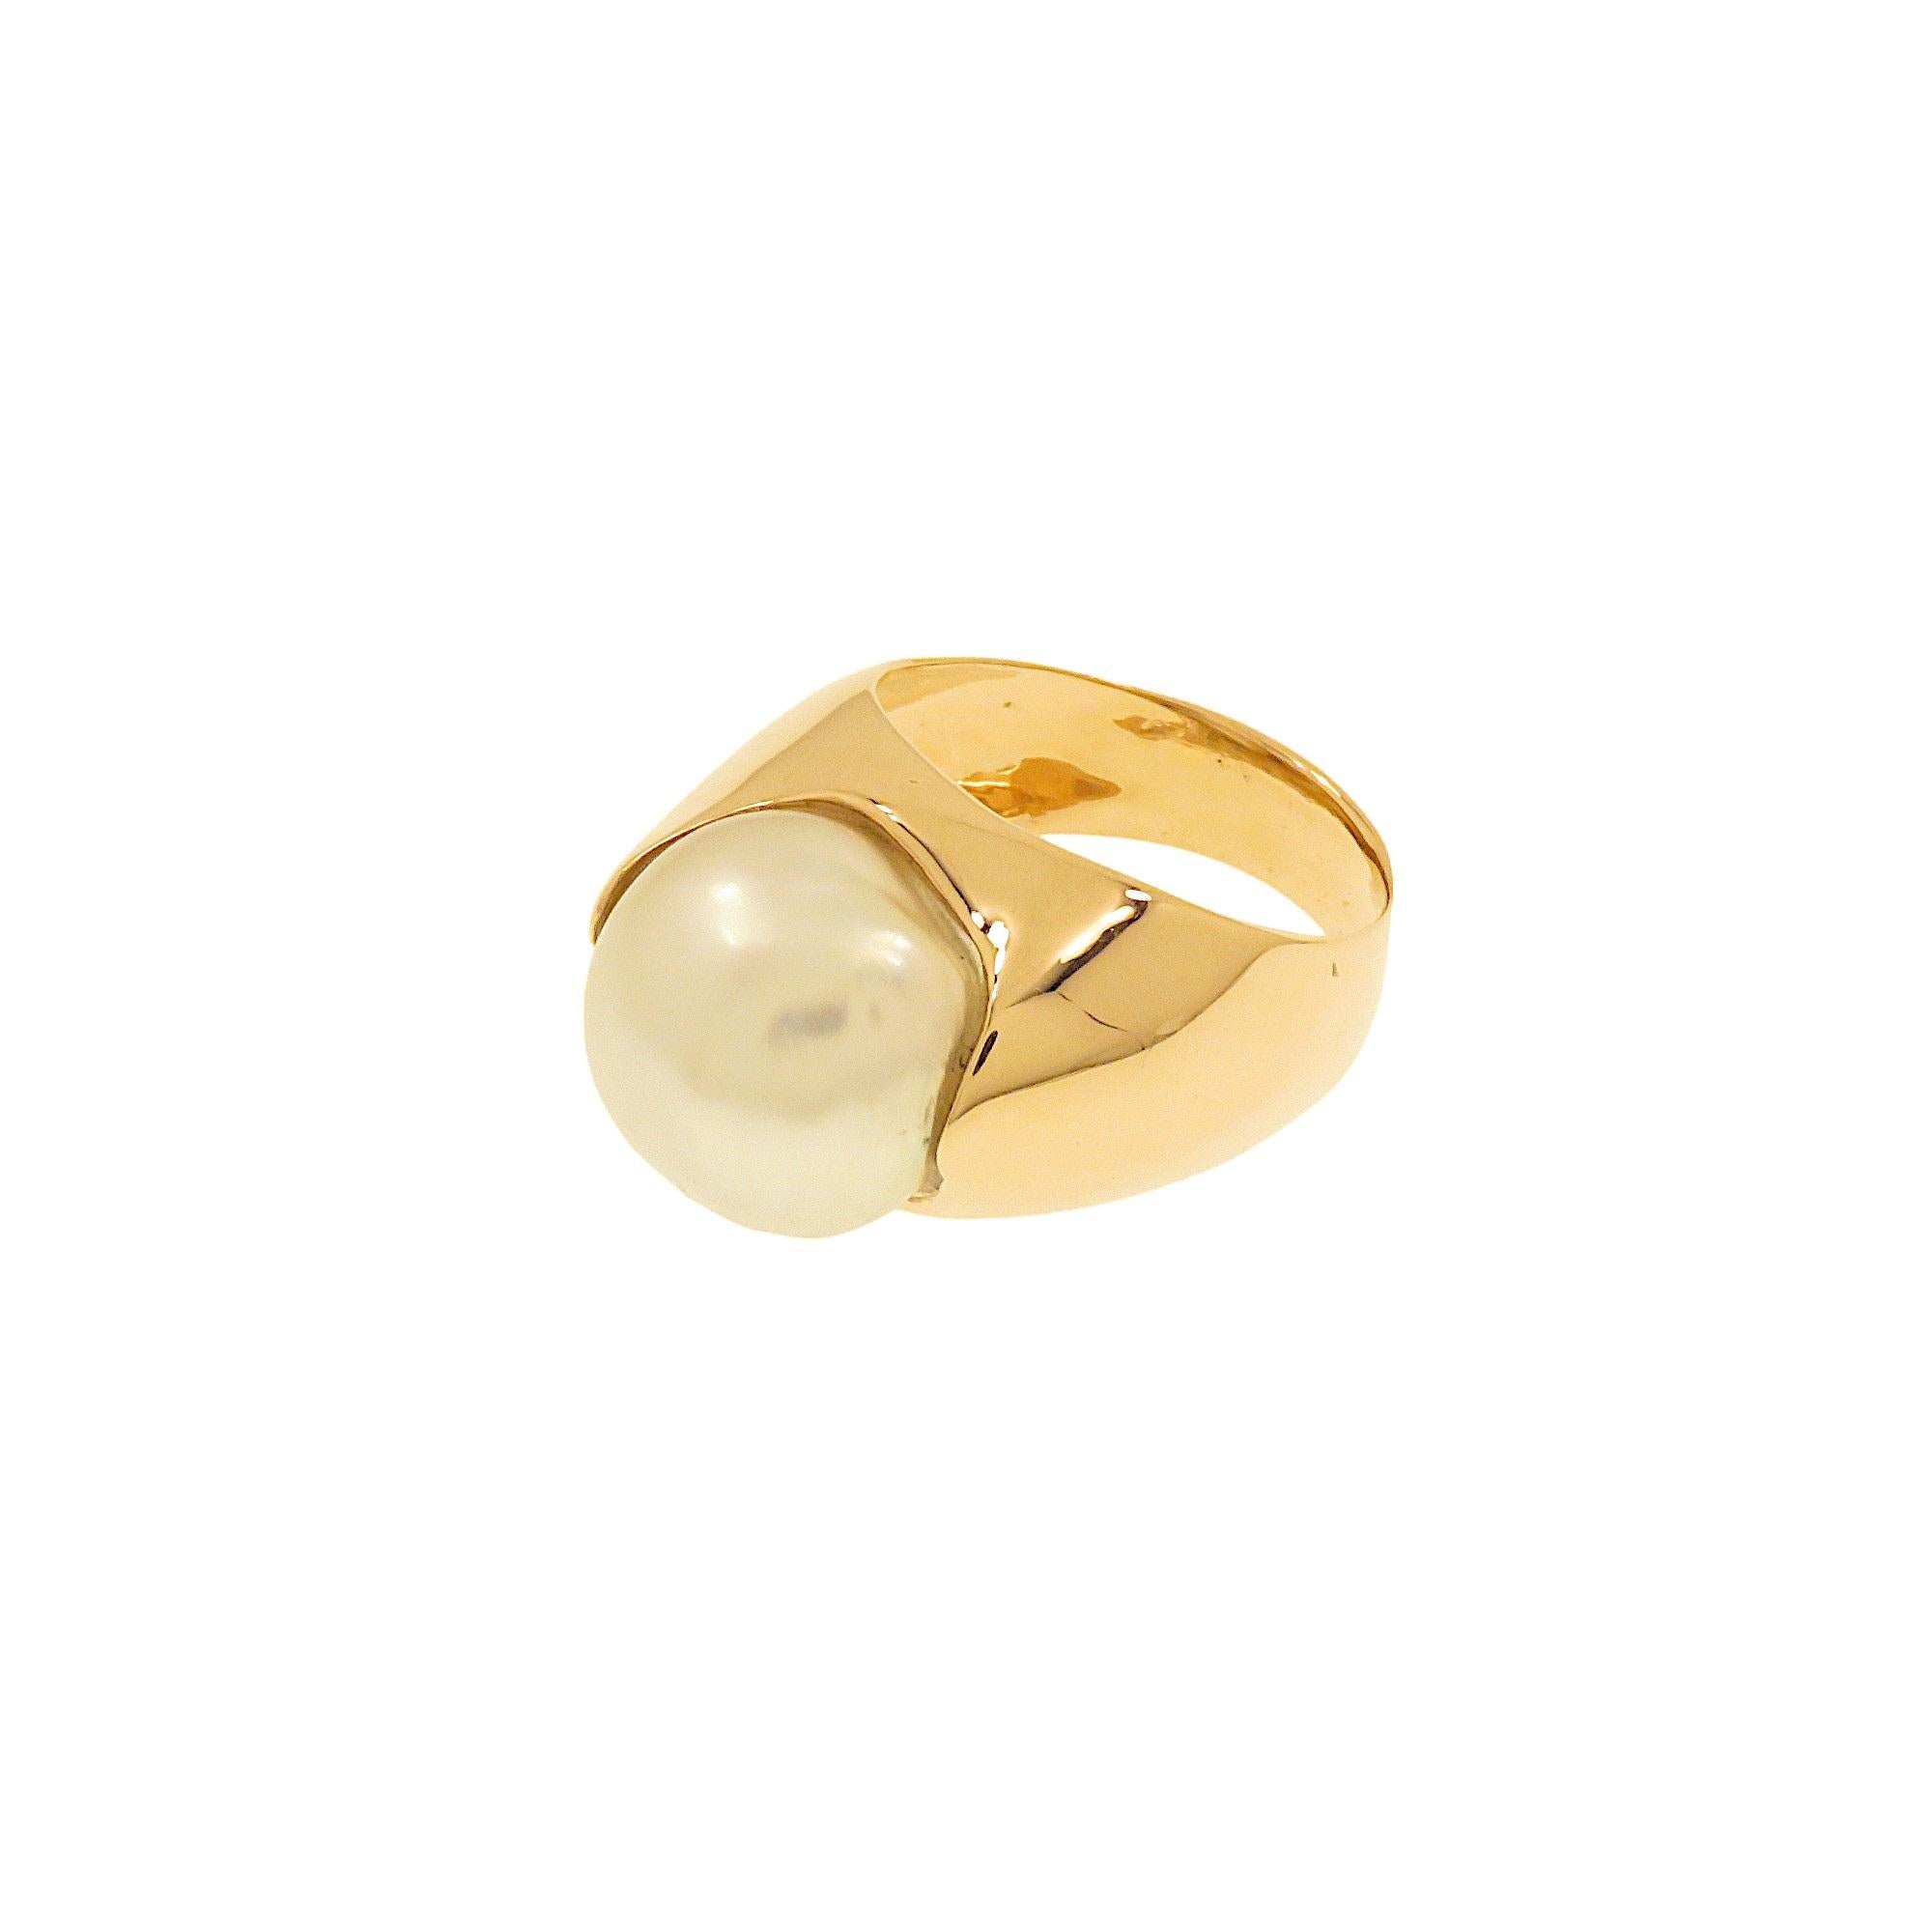 Uncut Botta jewelry ring with Australian pearl in rose gold For Sale